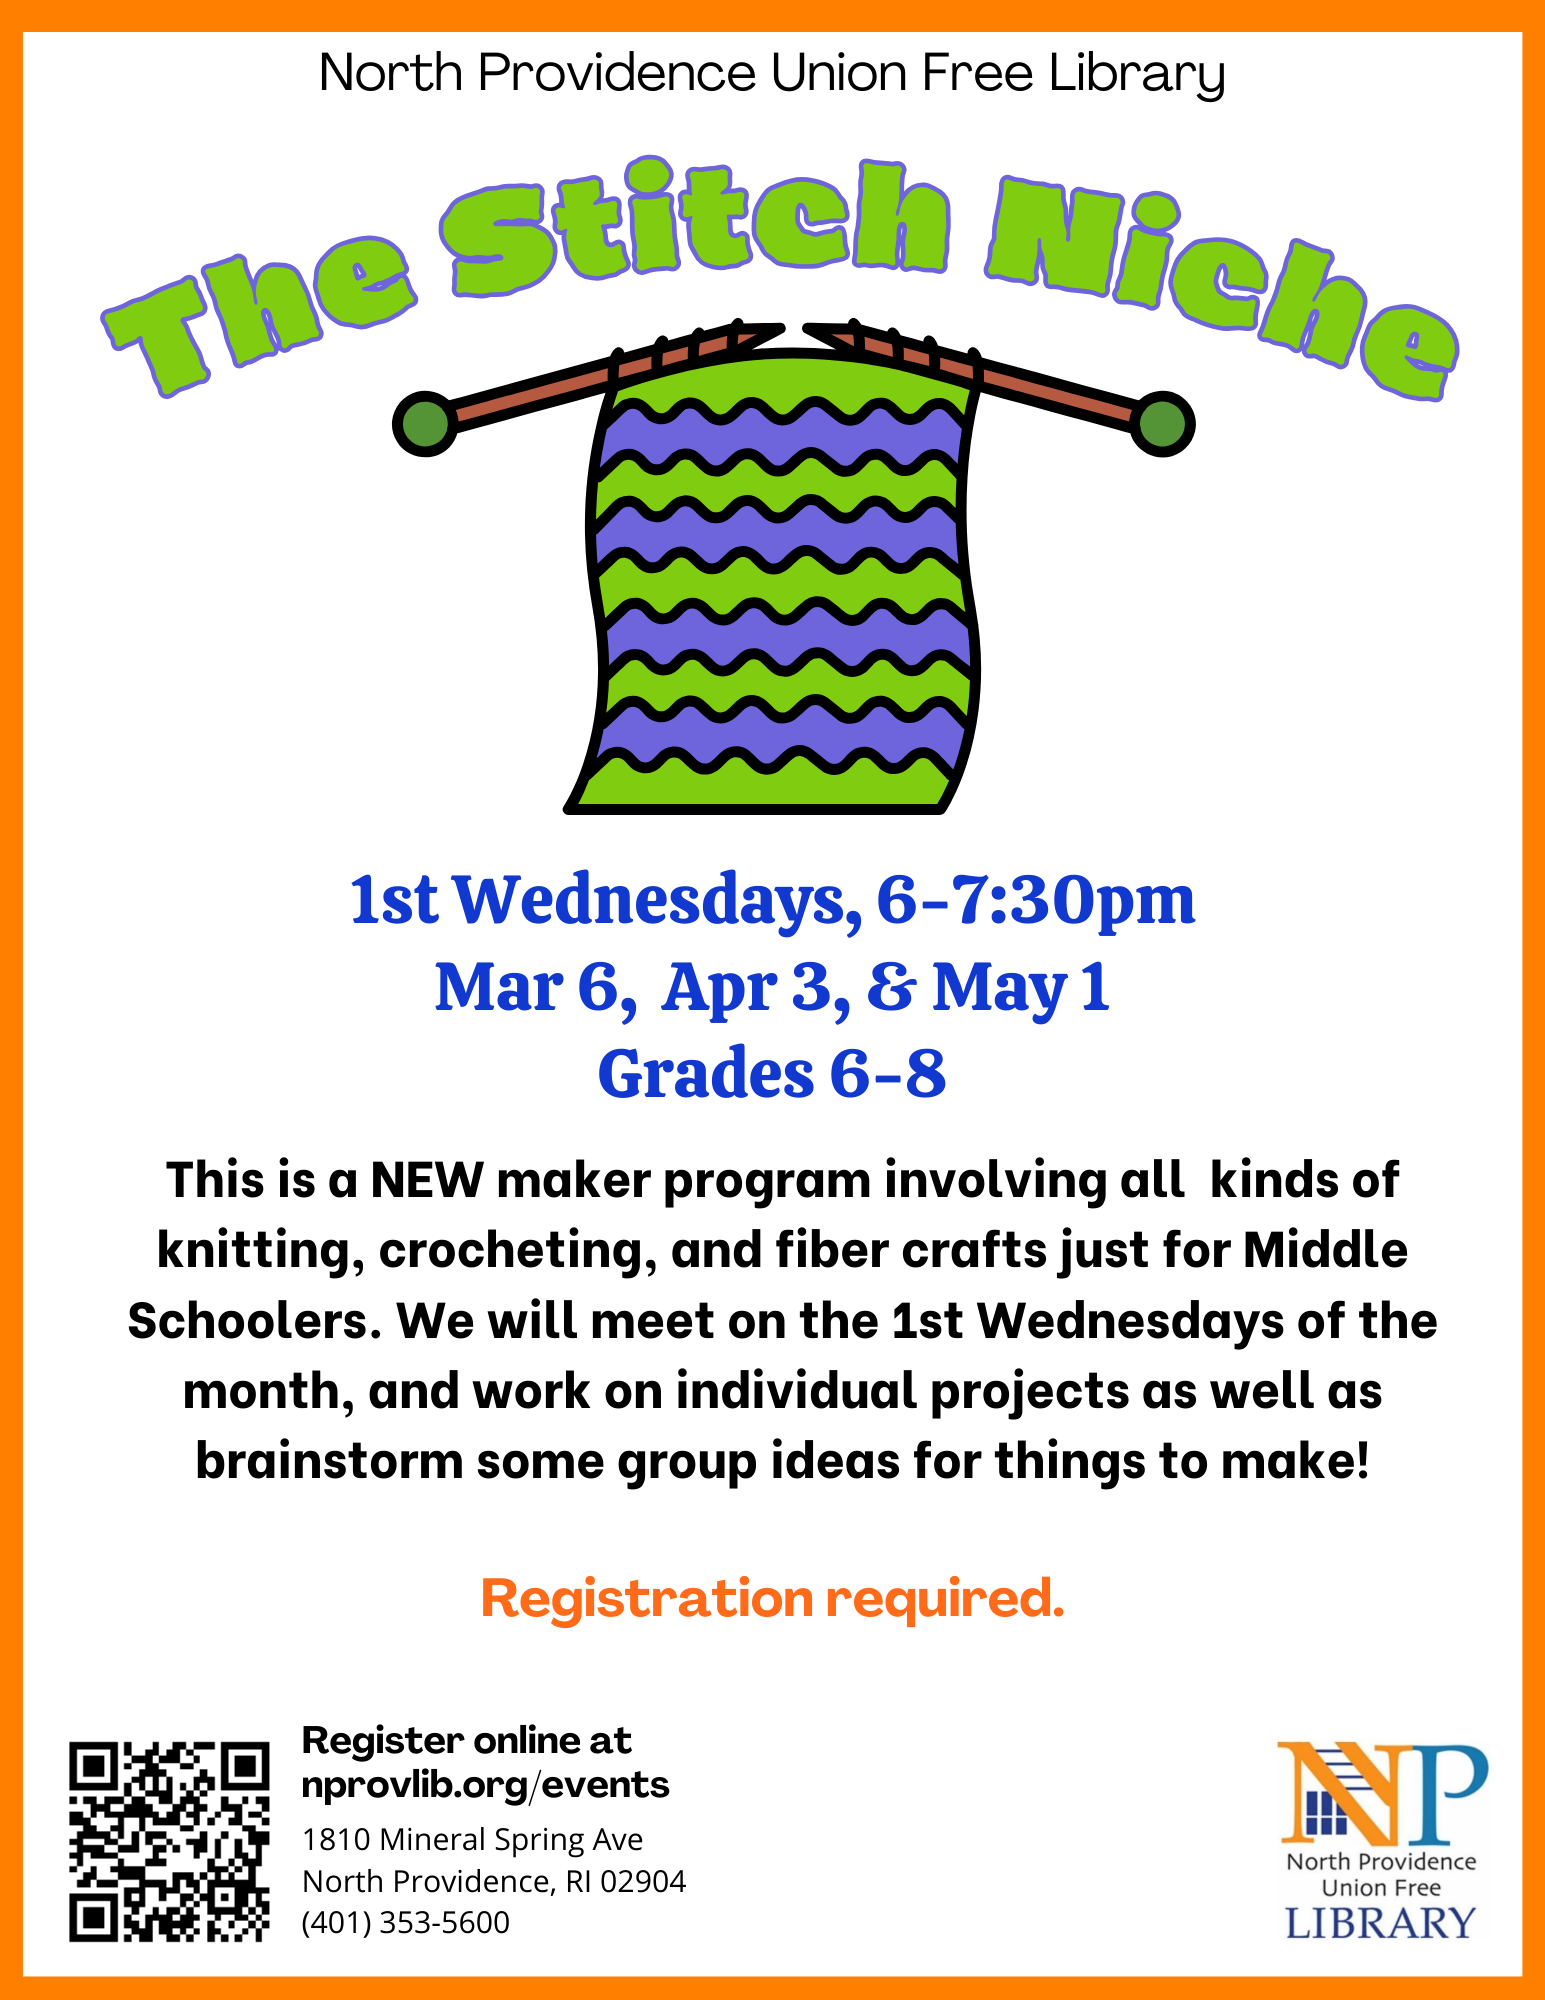 Flyer showing dates for the Middle School Stitch Niche program.